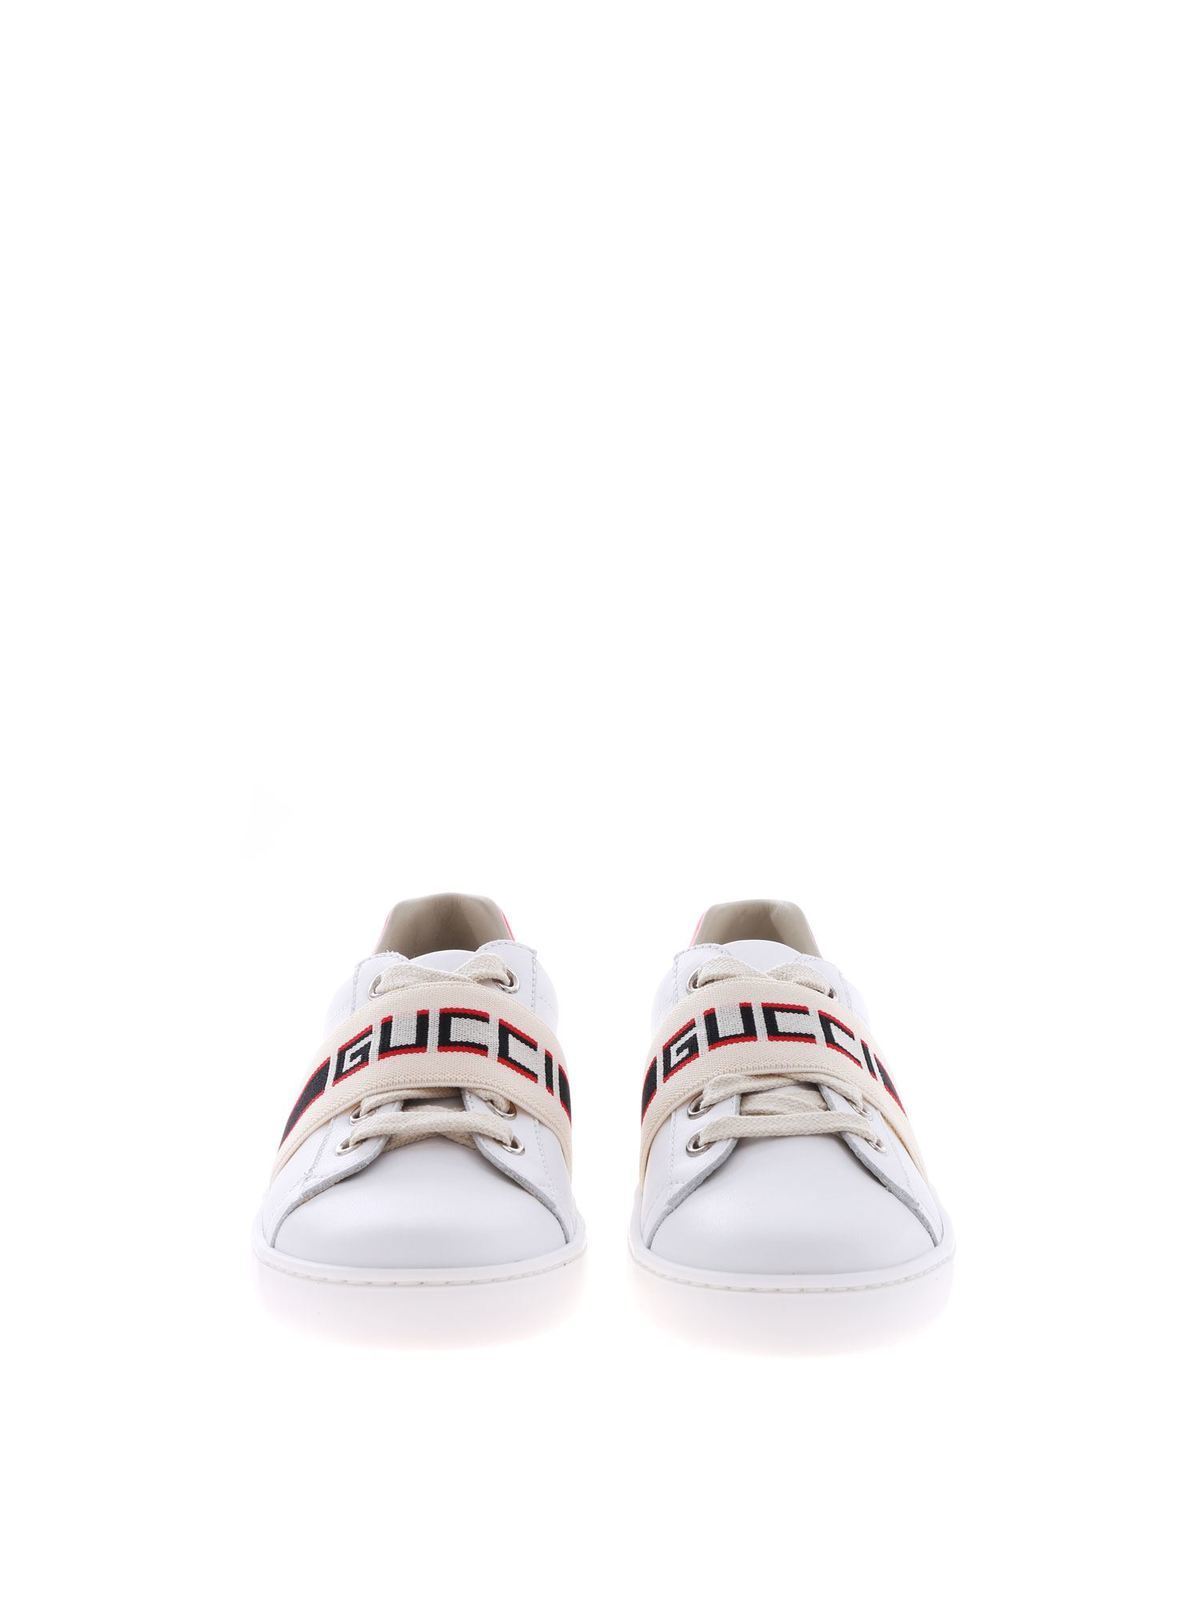 gucci band trainers